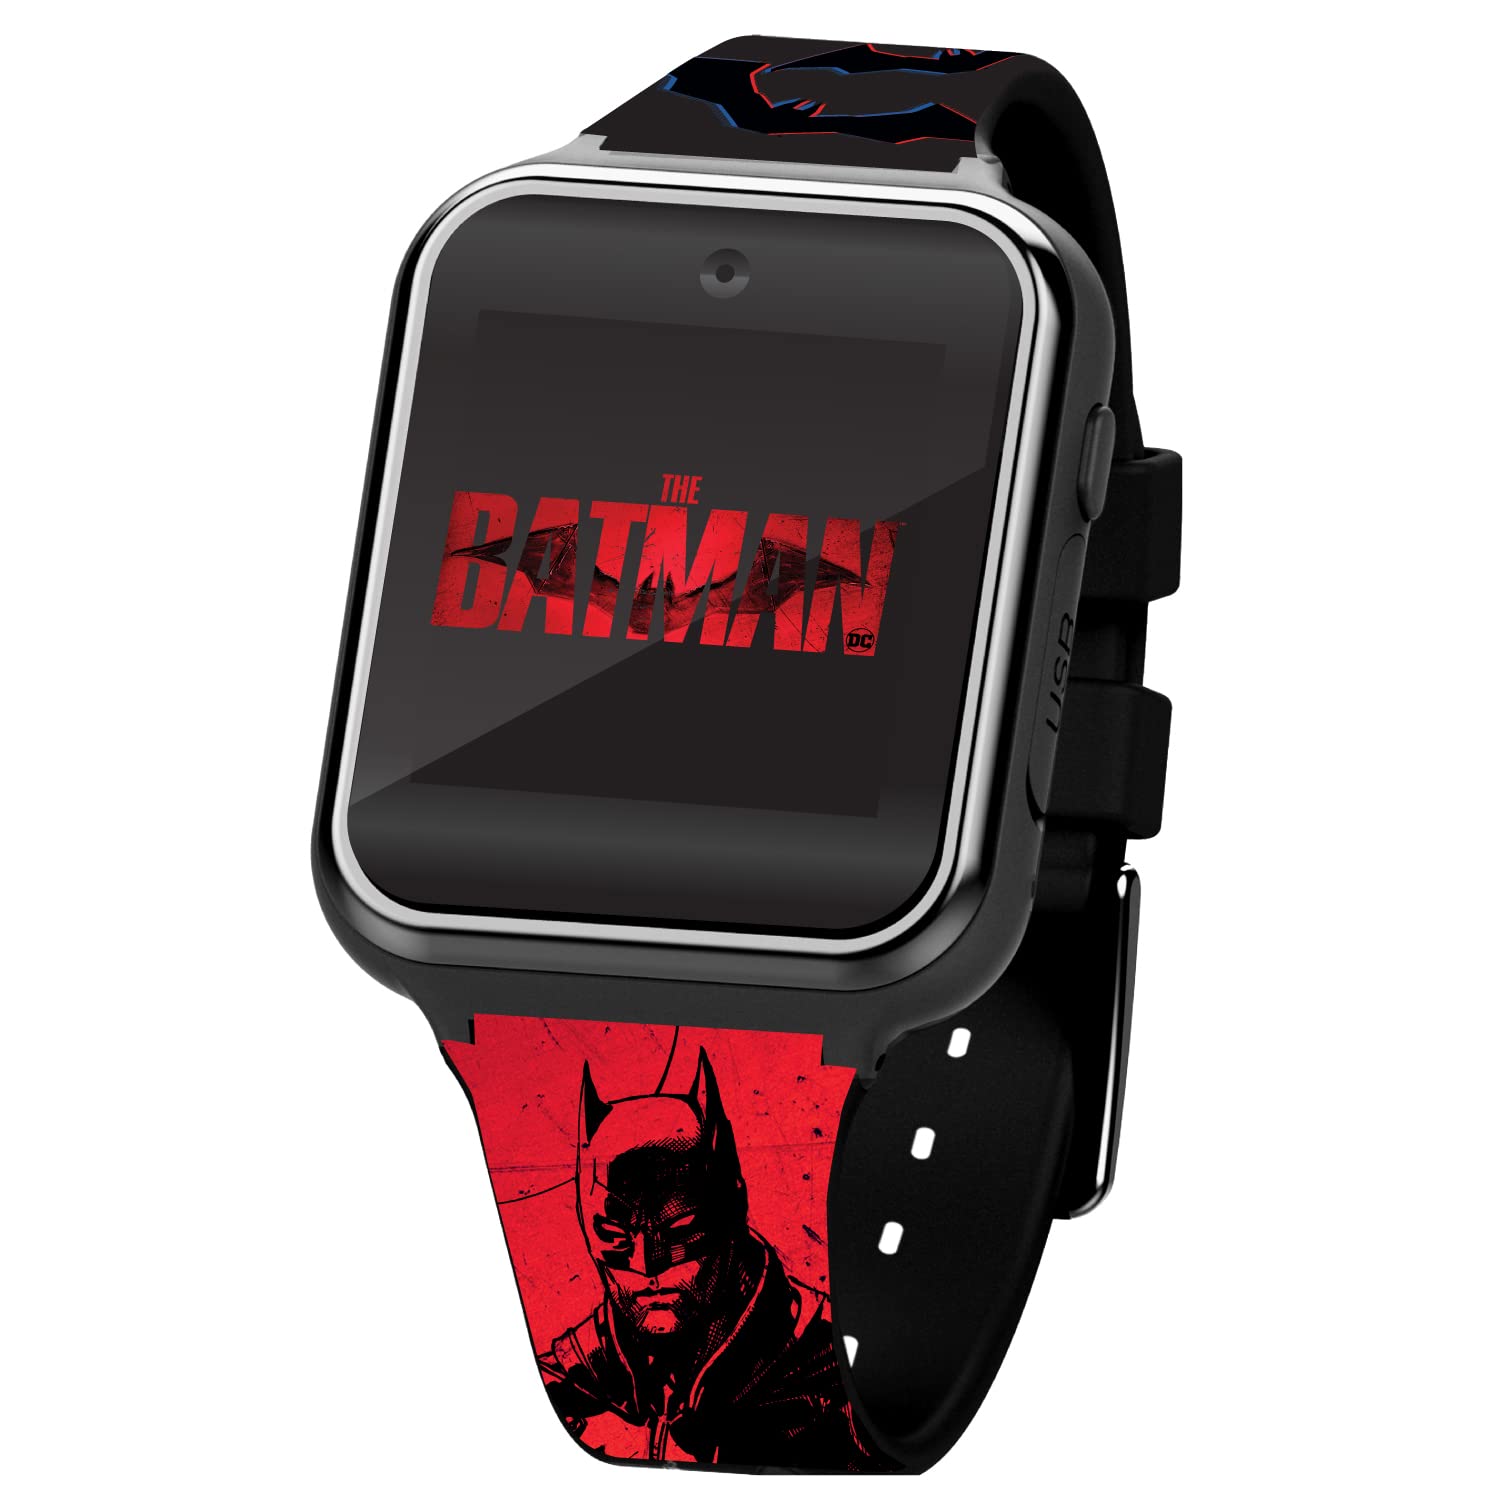 Accutime Batman Black Kids Educational Learning Touchscreen Smart Watch Toy for Girls, Boys, Toddlers - Selfie Cam, Learning Games, Alarm, Calculator, Pedometer & More (Model: BAT4973AZ)